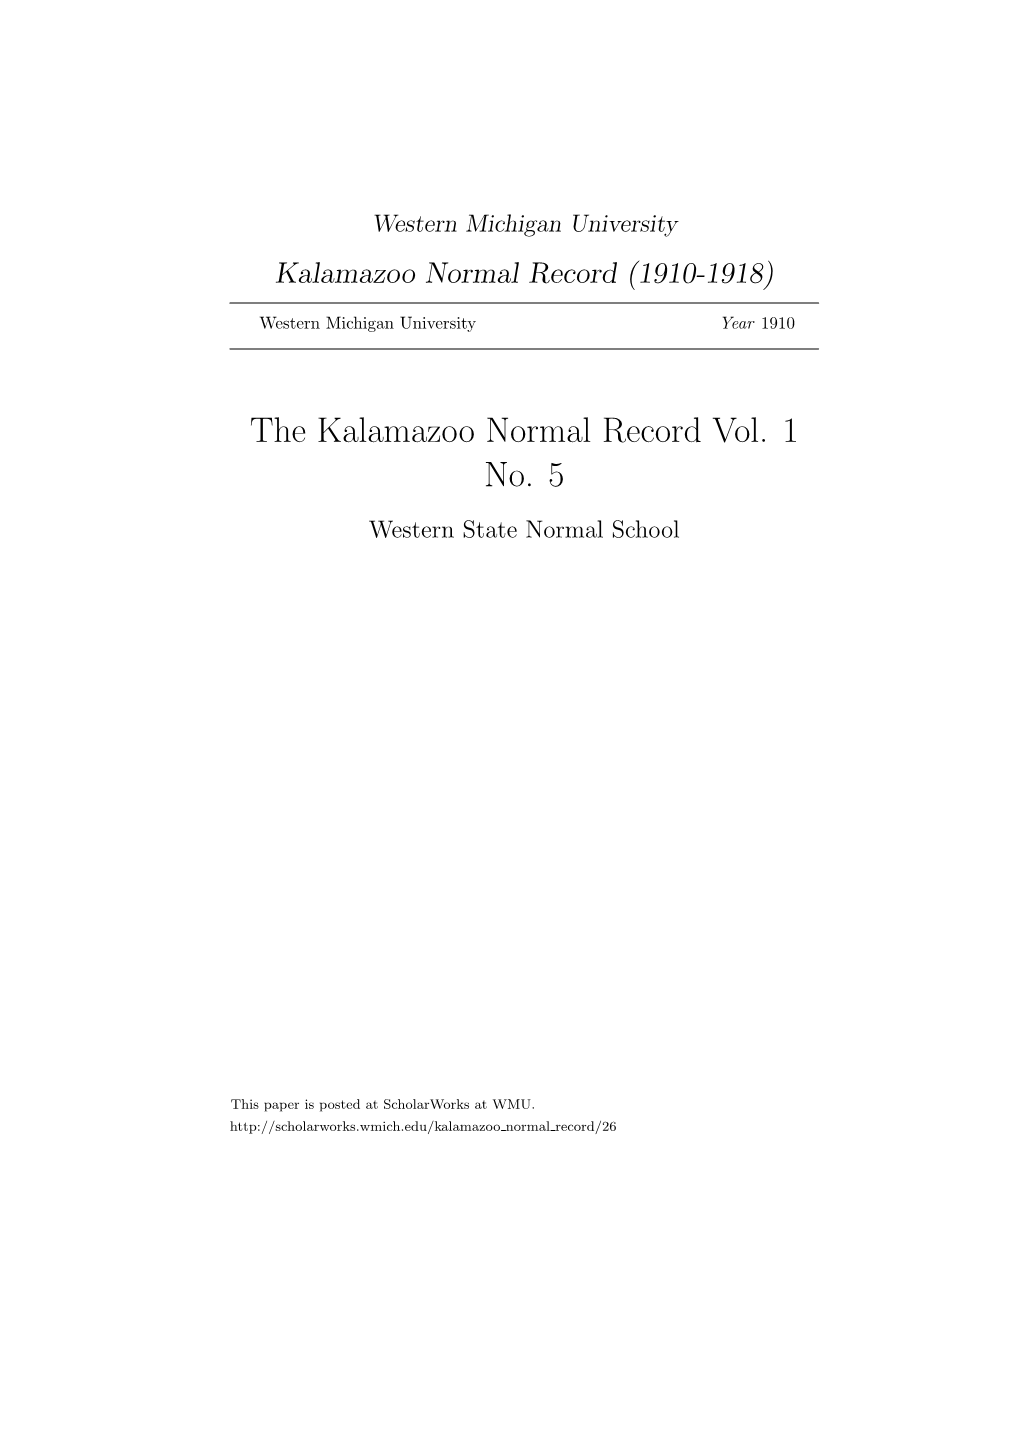 The Kalamazoo Normal Record Vol. 1 No. 5 Western State Normal School